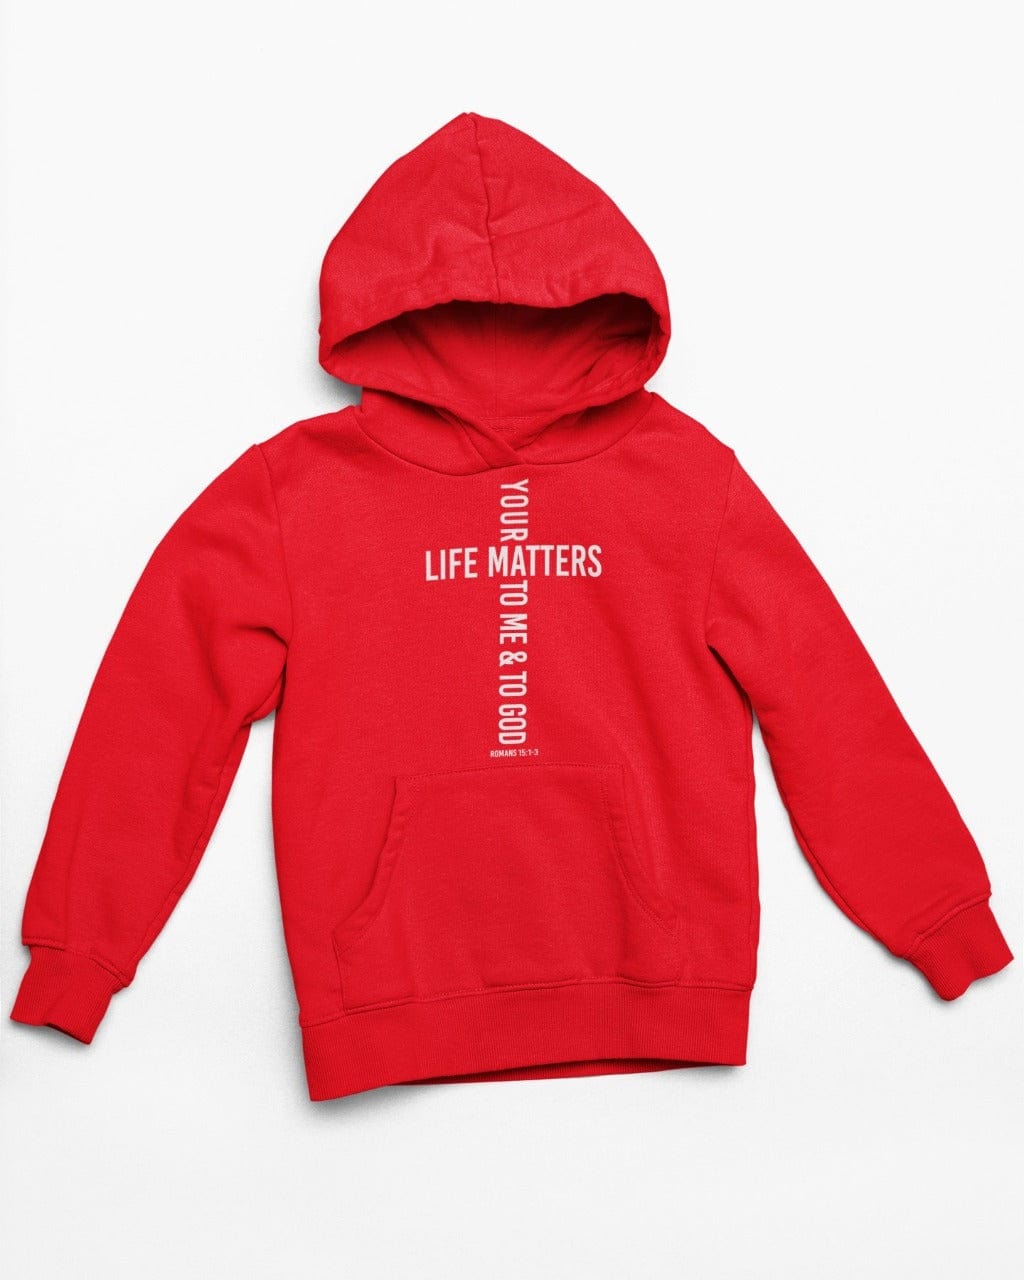 Wrighteous Wear Hoodie Red / S Your Life Matters Unisex Christian Hoodie